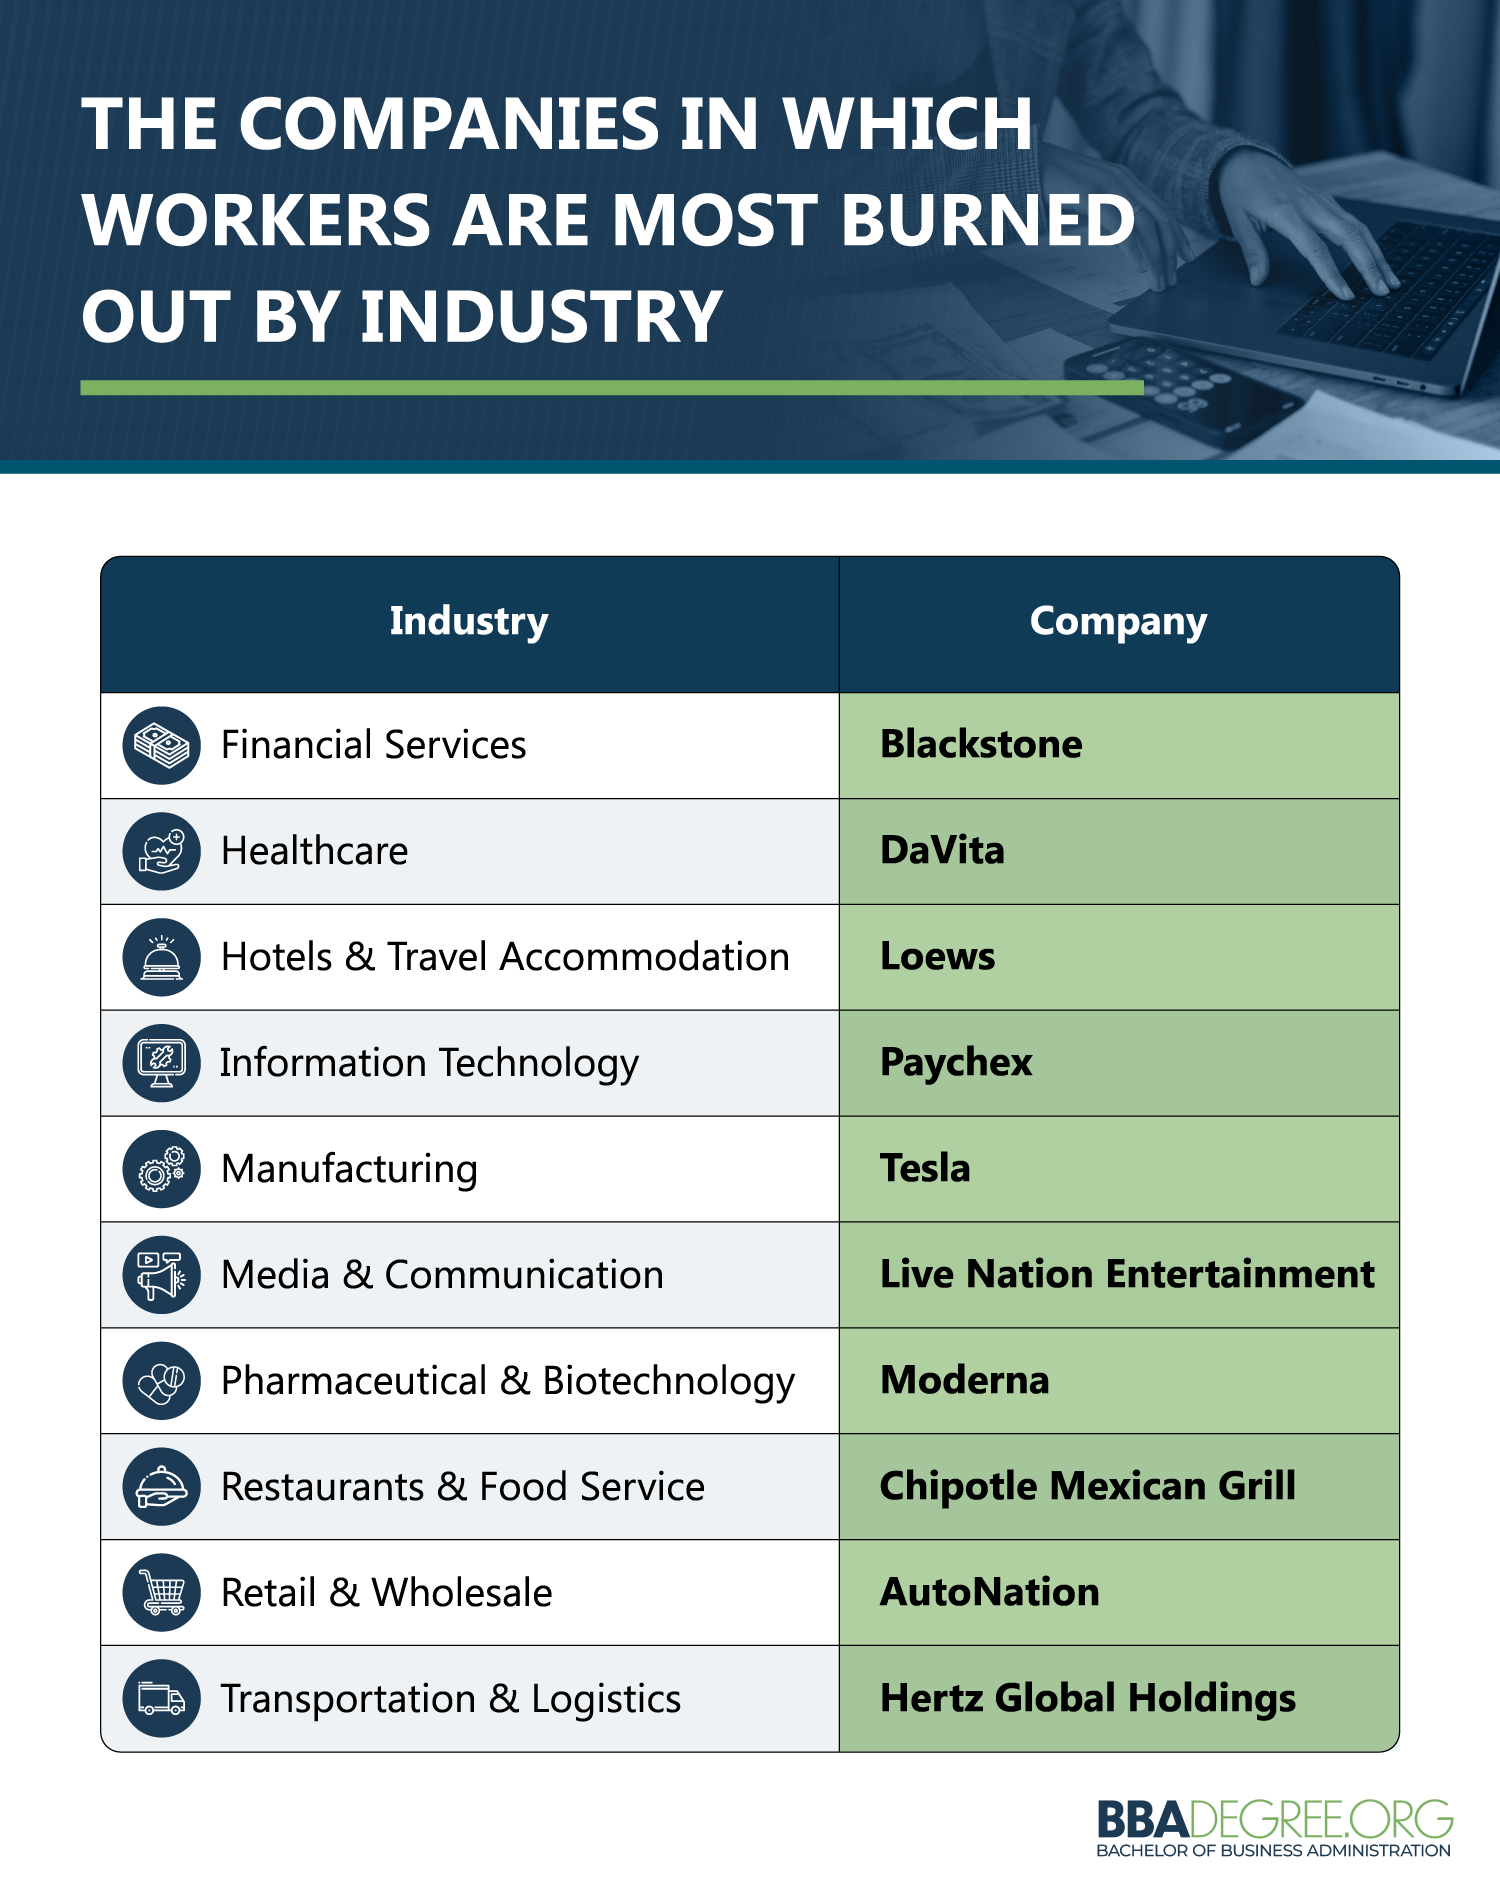 A table showing the company with the most burnout complaints by industry